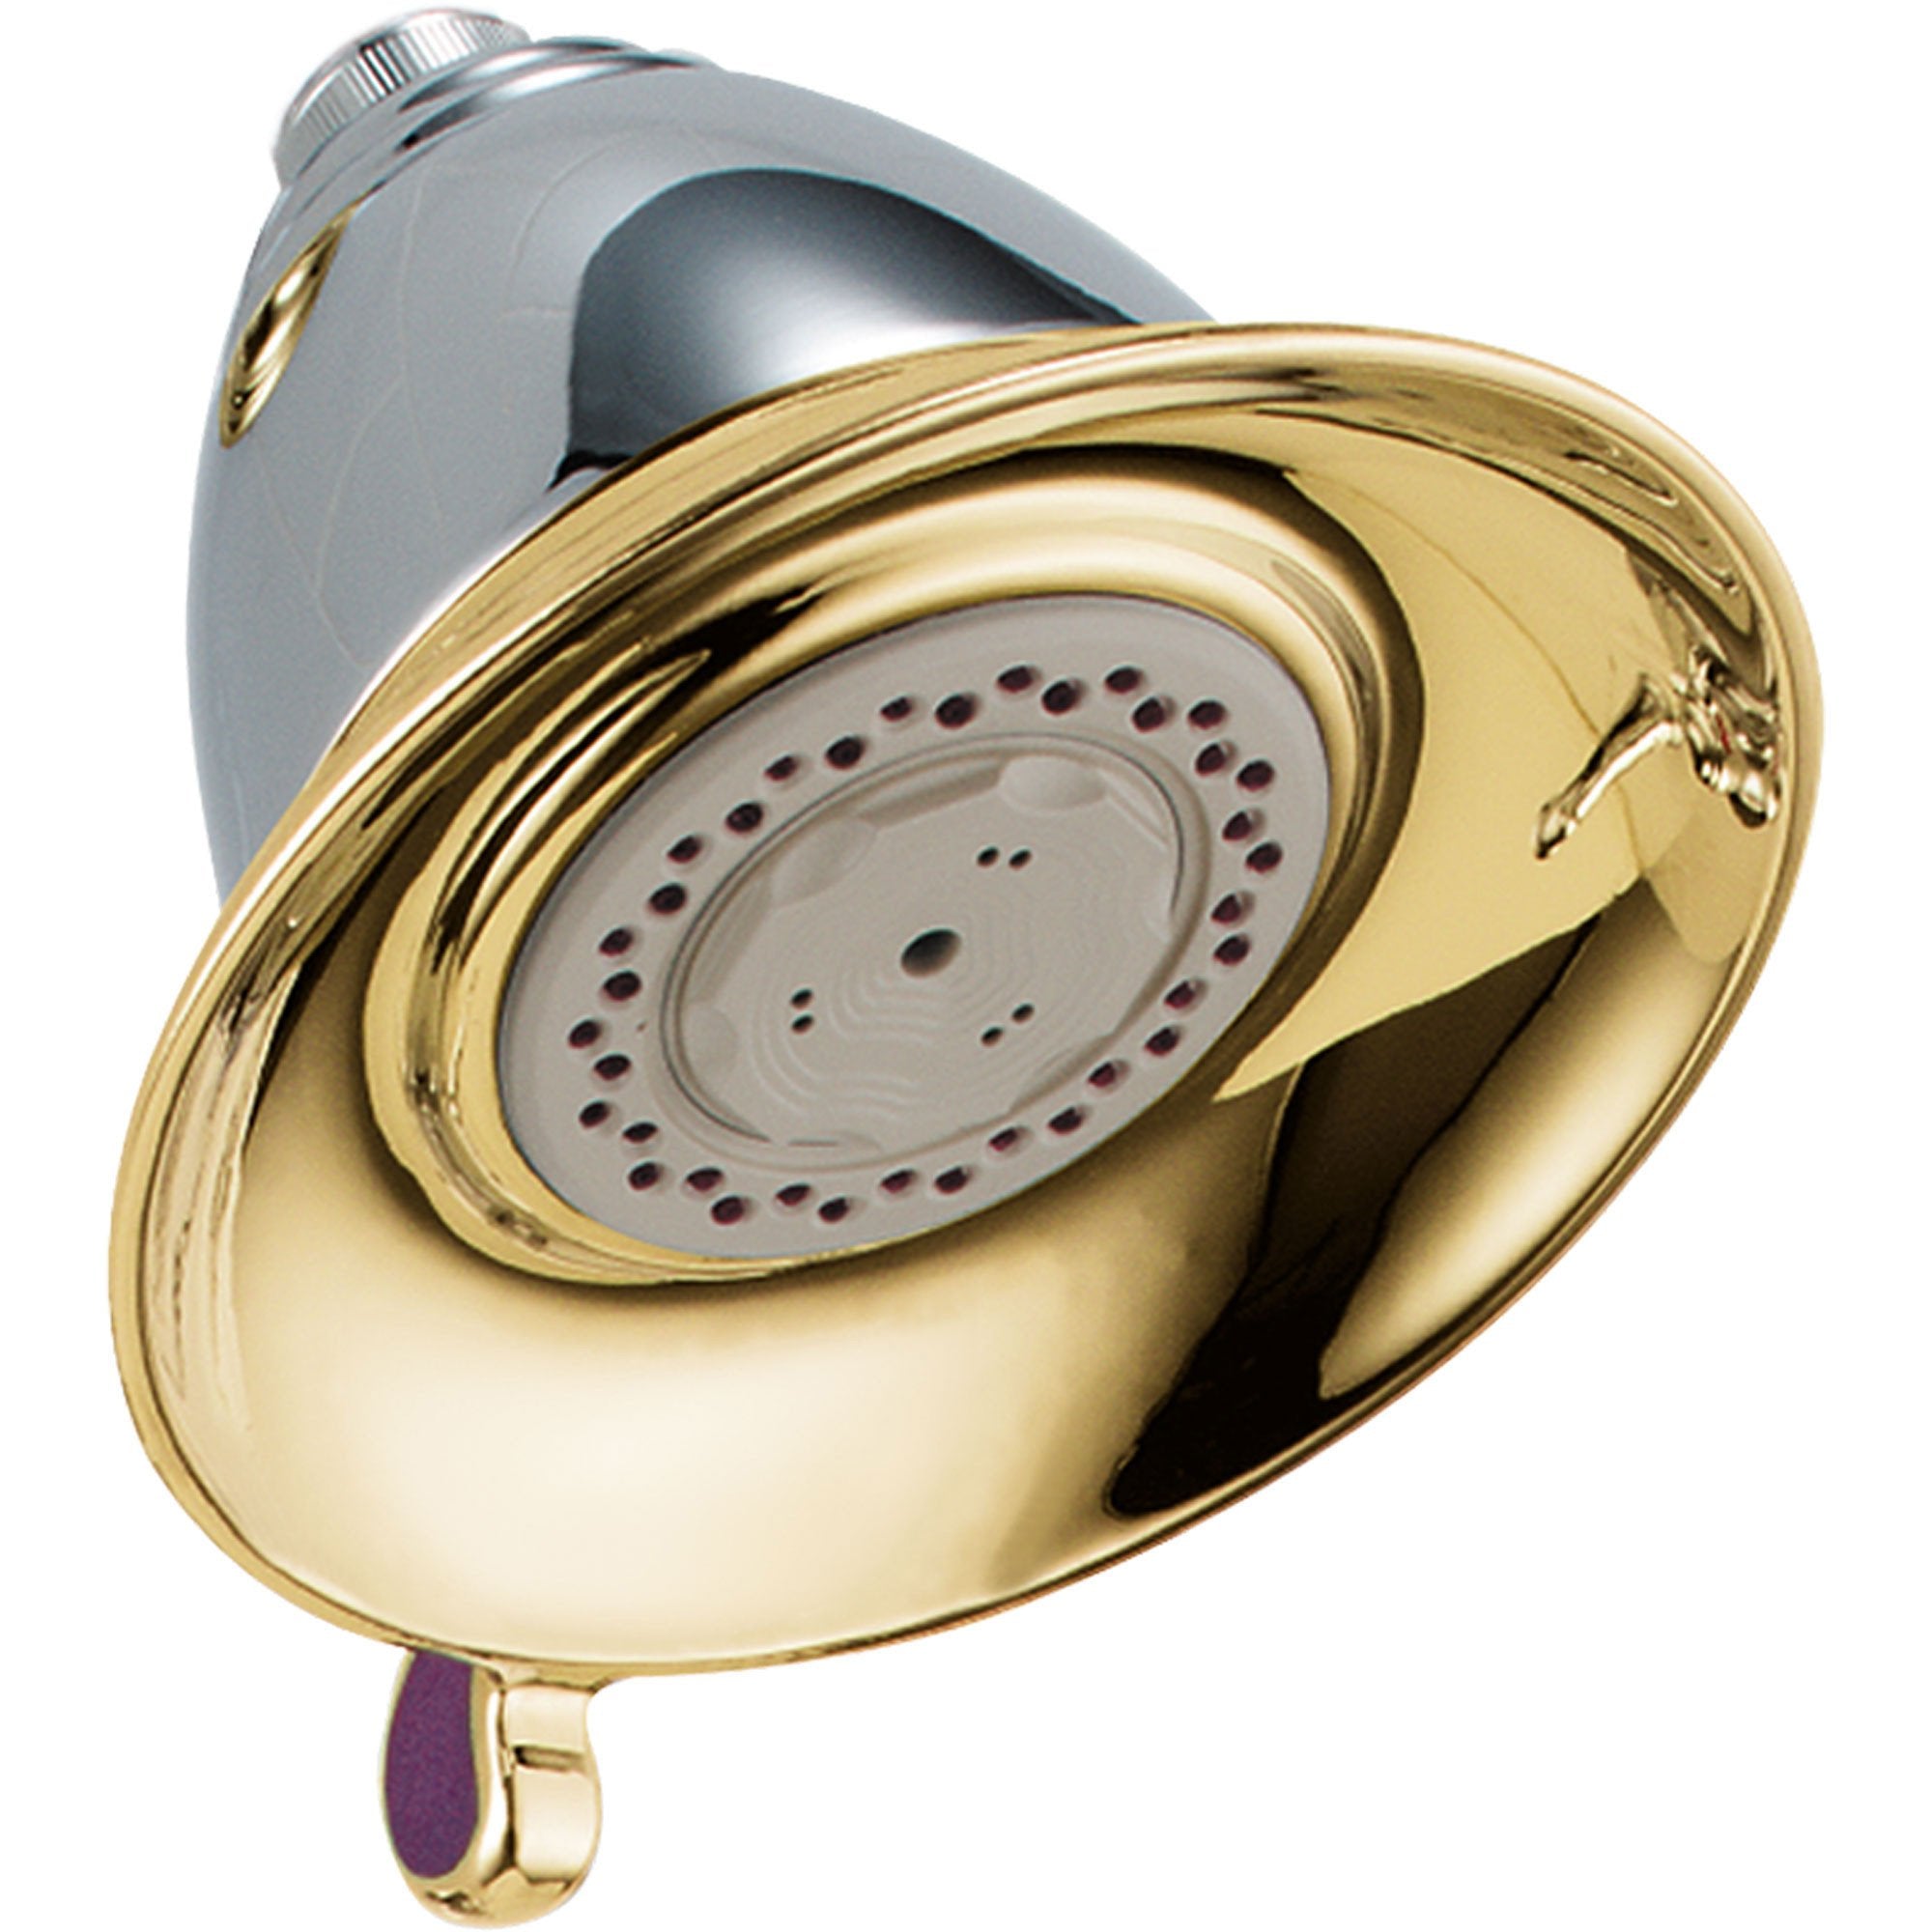 Delta Victorian 5-1/2" Chrome / Polished Brass Touch-Clean Showerhead 438477